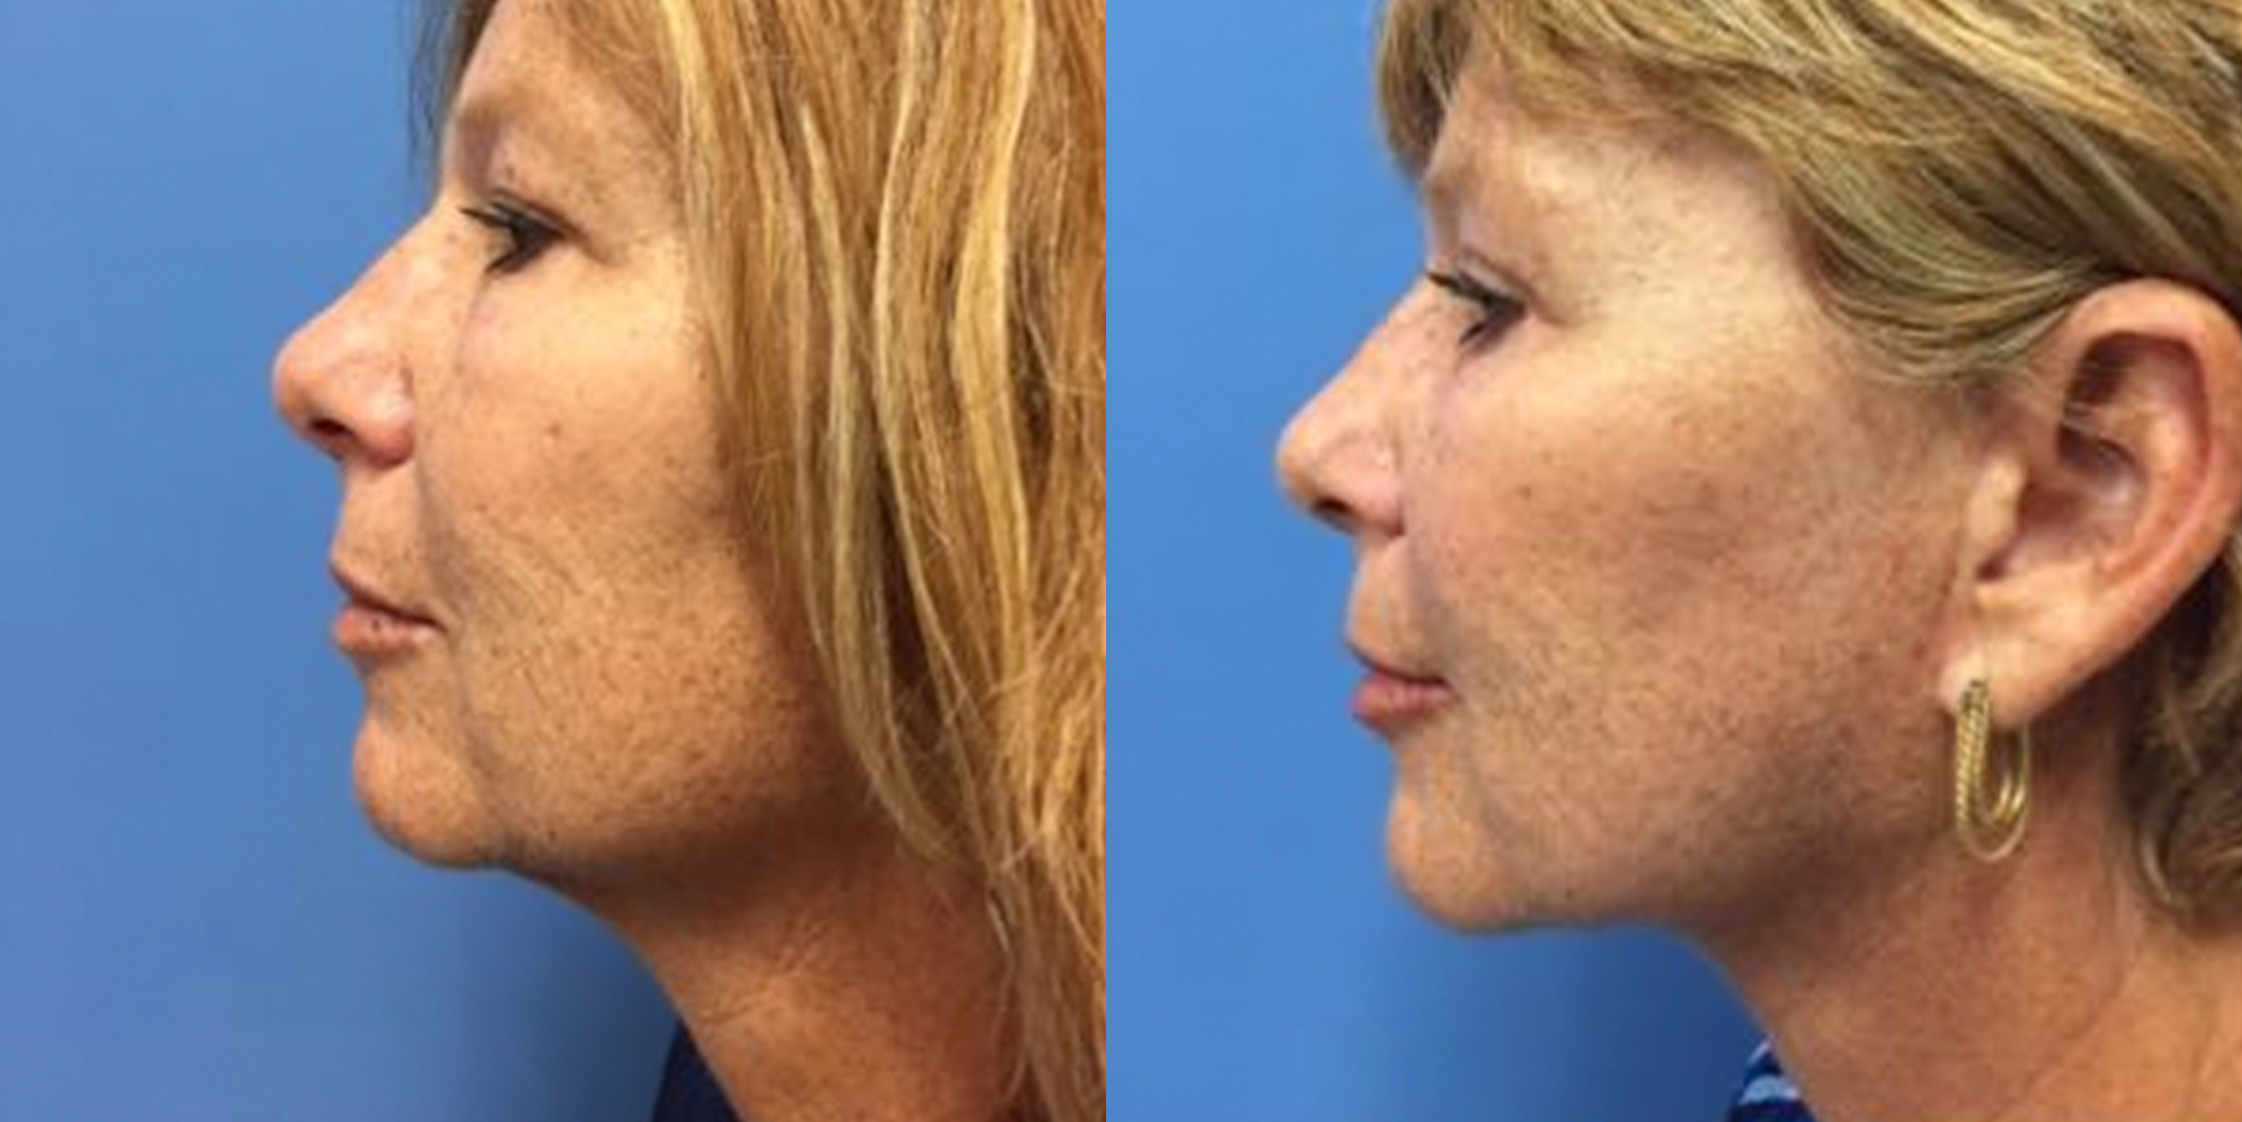 Hess-Sandeen-Facelift-Tucson-before-after17-1024x683